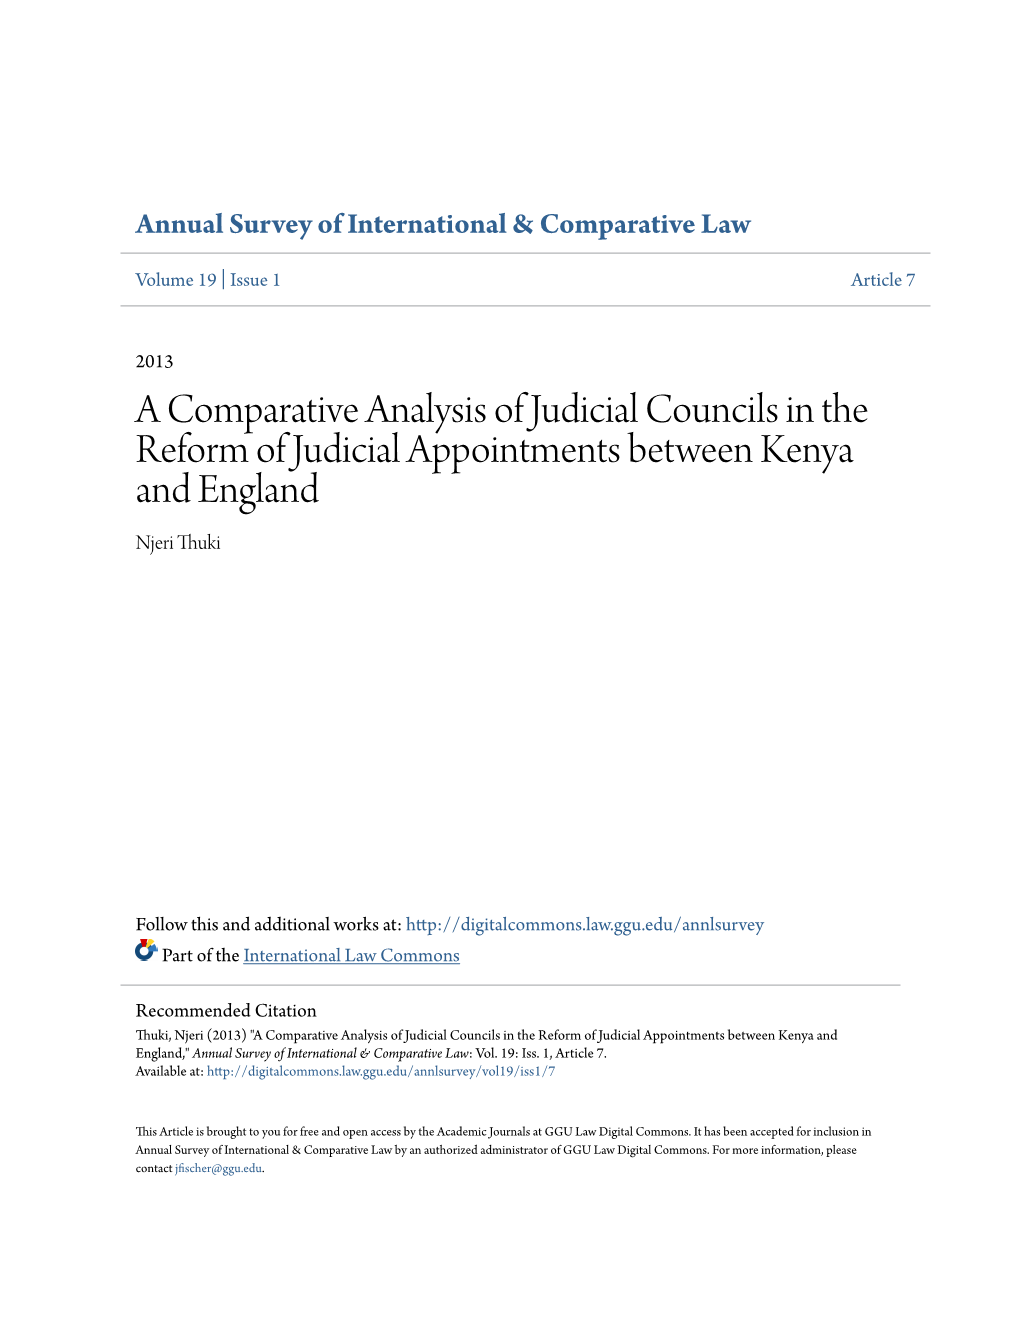 A Comparative Analysis of Judicial Councils in the Reform of Judicial Appointments Between Kenya and England Njeri Thuki